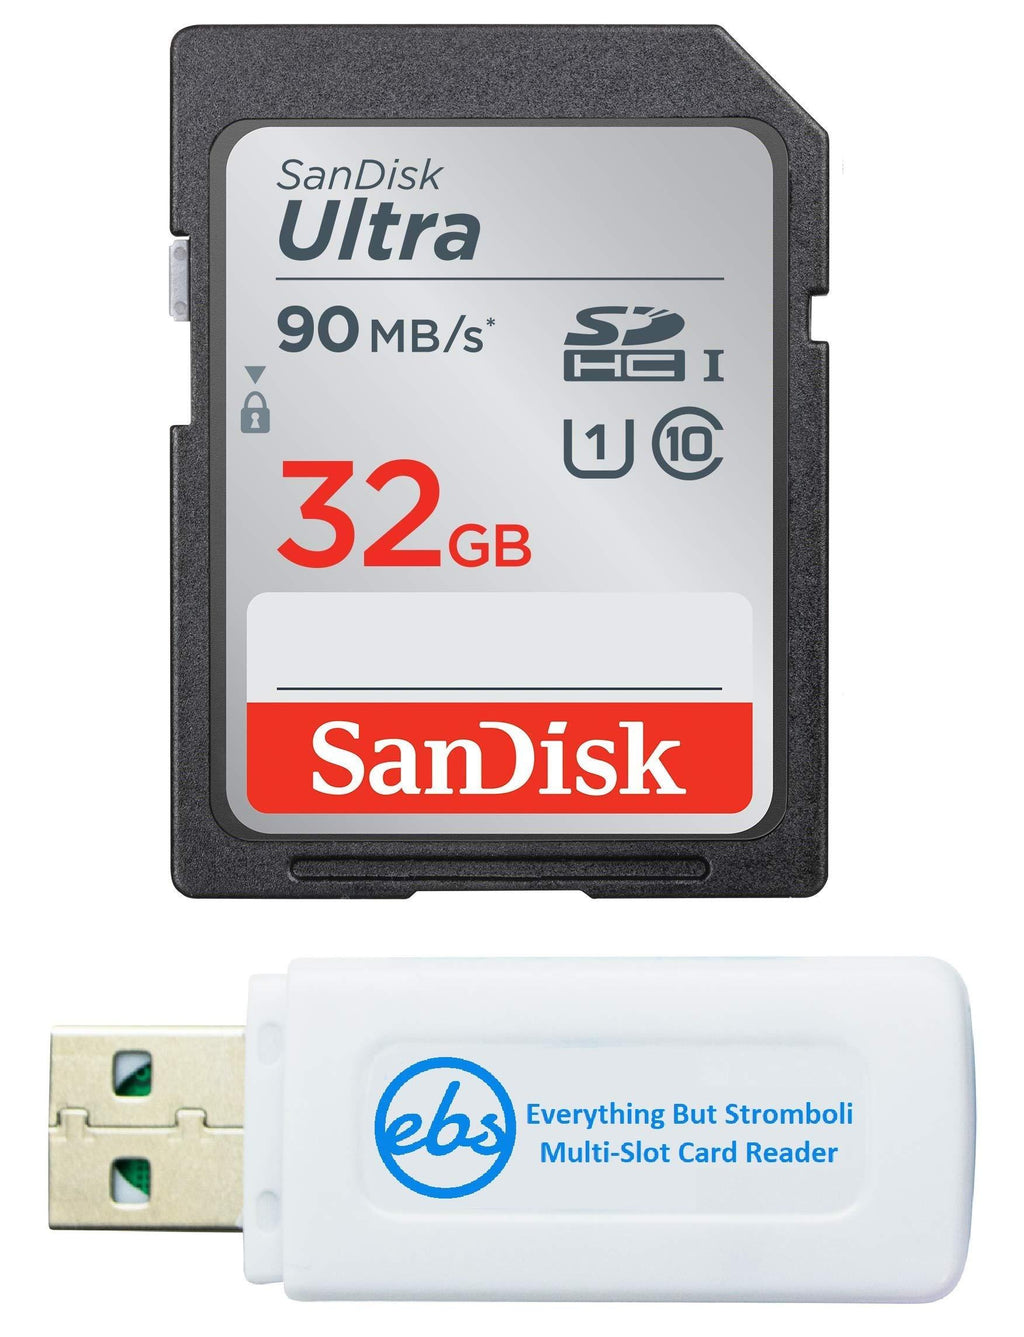 SanDisk 32GB SDHC SD Ultra Memory Card Works with Canon Powershot SX530 HS, G7 X Mark II, G9 X Mark II Camera UHS-I (SDSDUNR-032G-GN6IN) Bundle with (1) Everything But Stromboli Combo Card Reader - LeoForward Australia